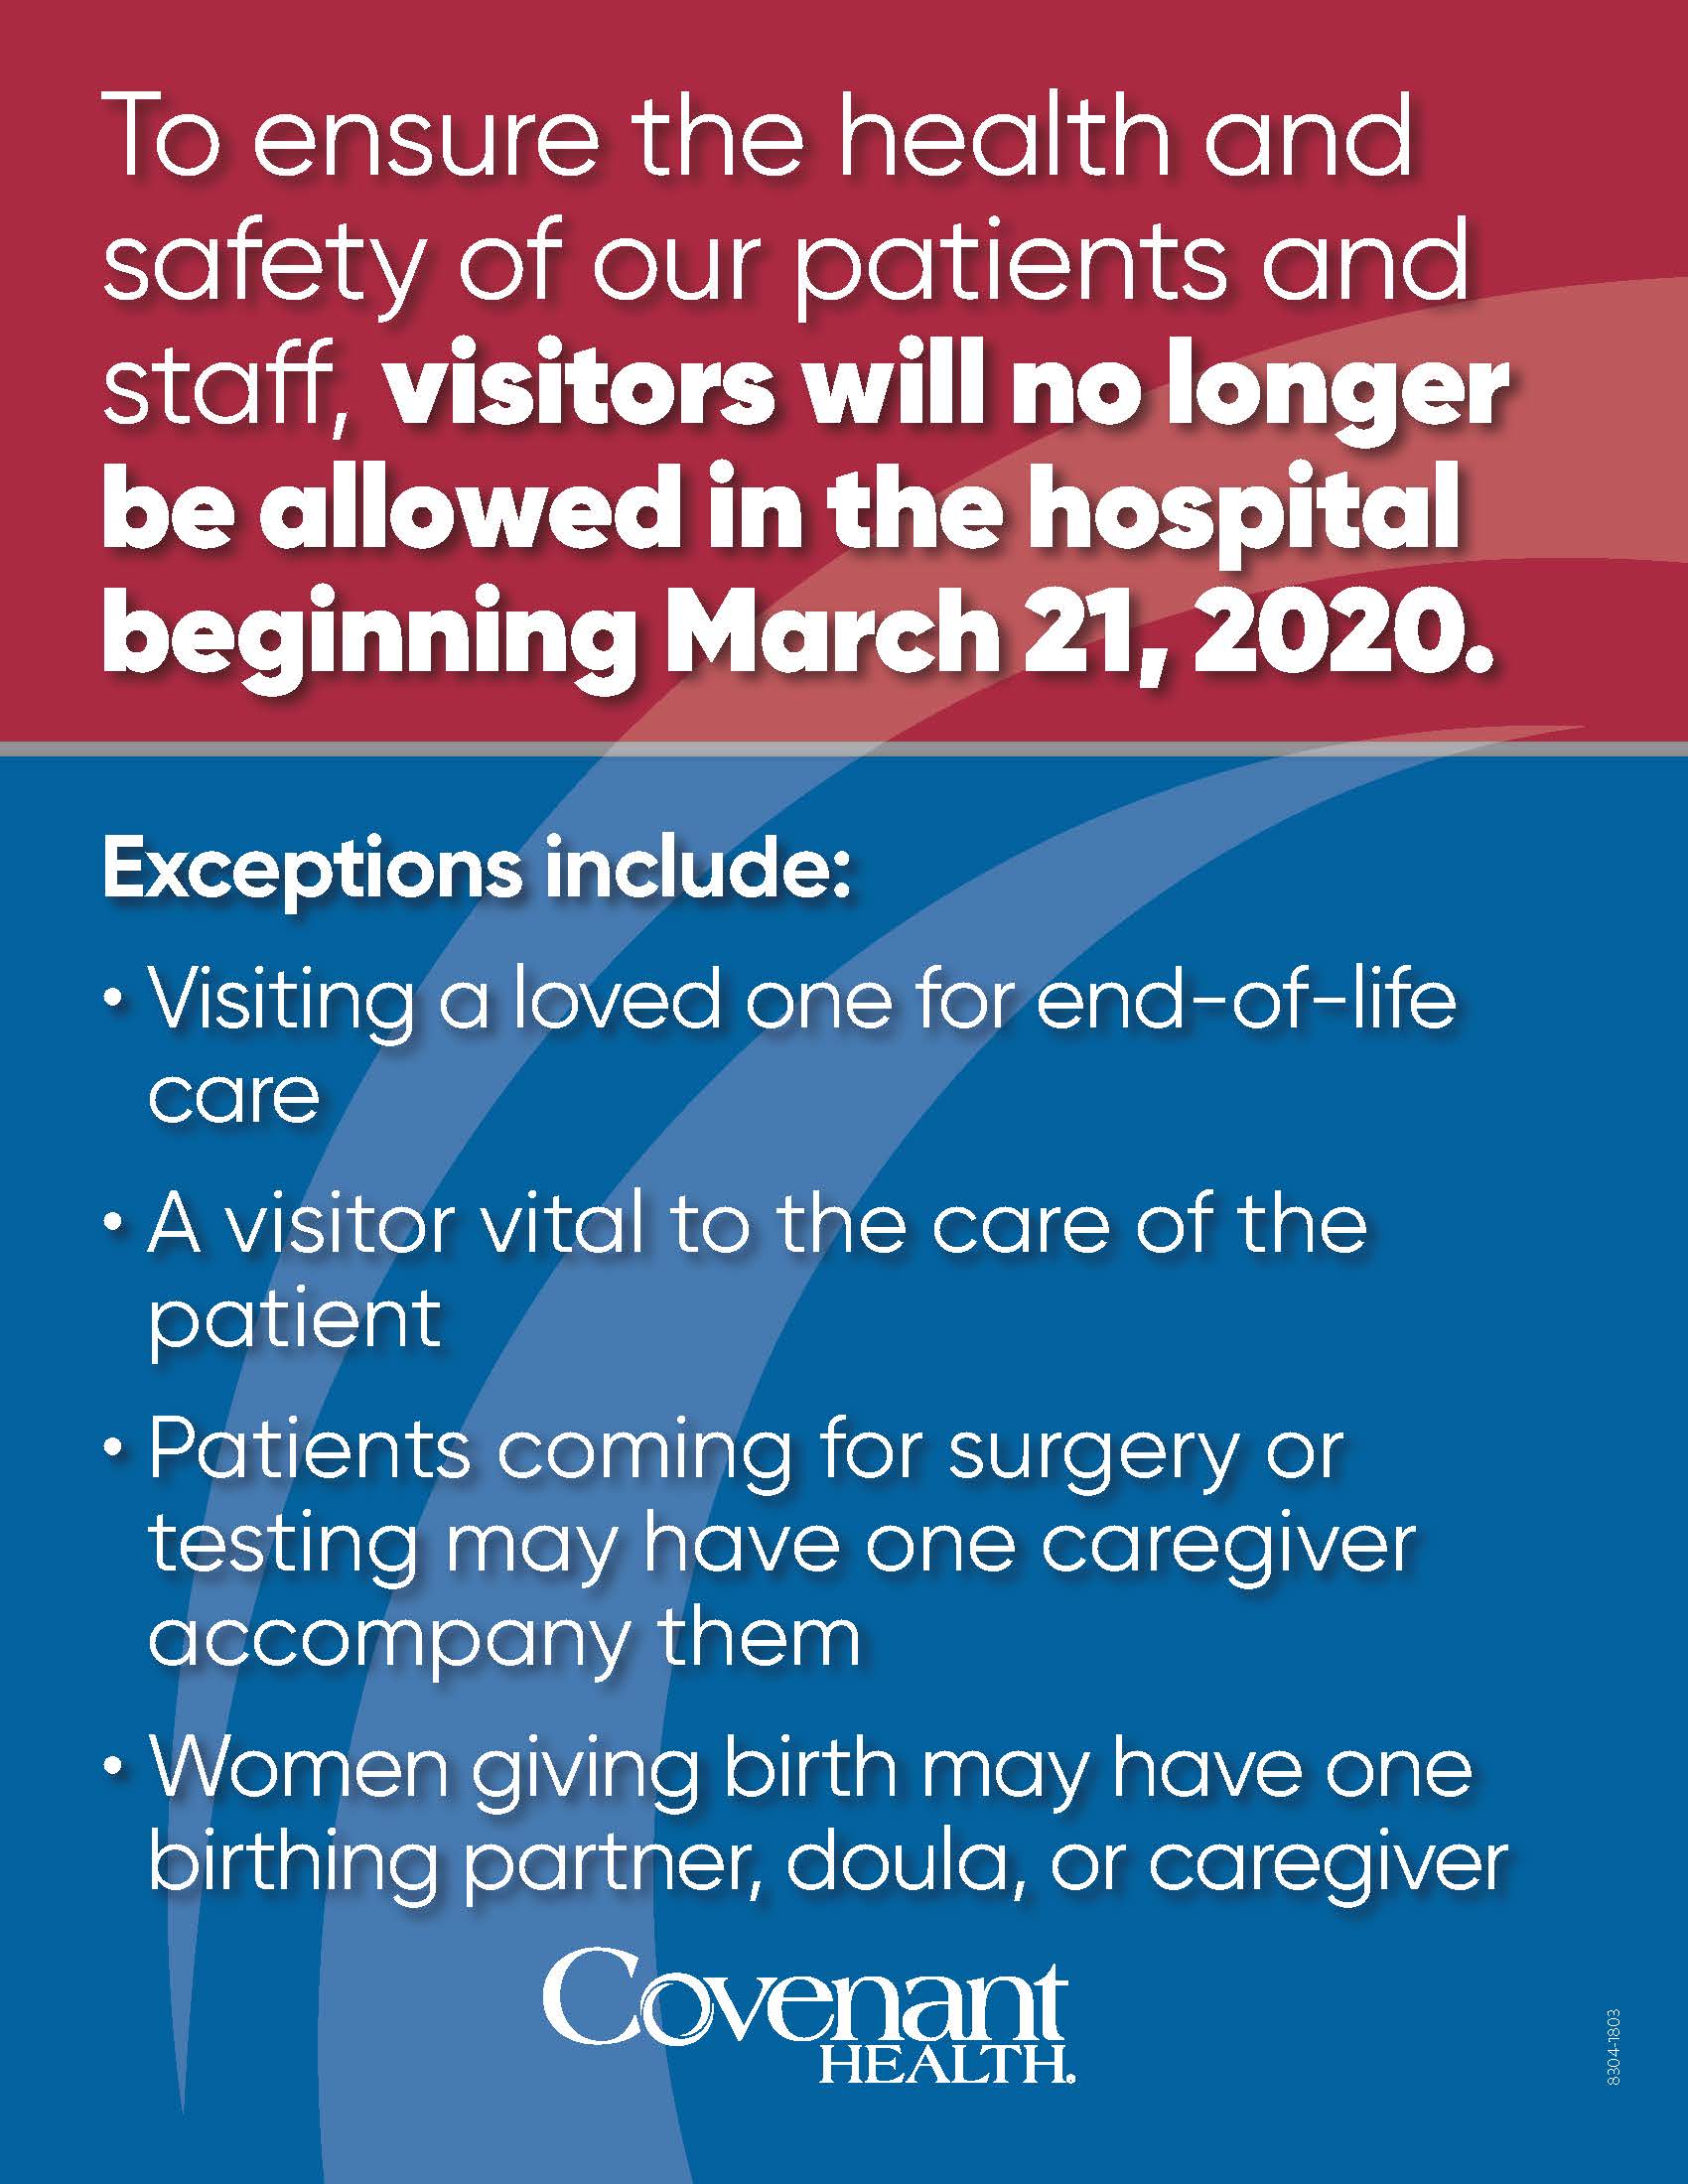 Updated visitor restrictions 3-21-20